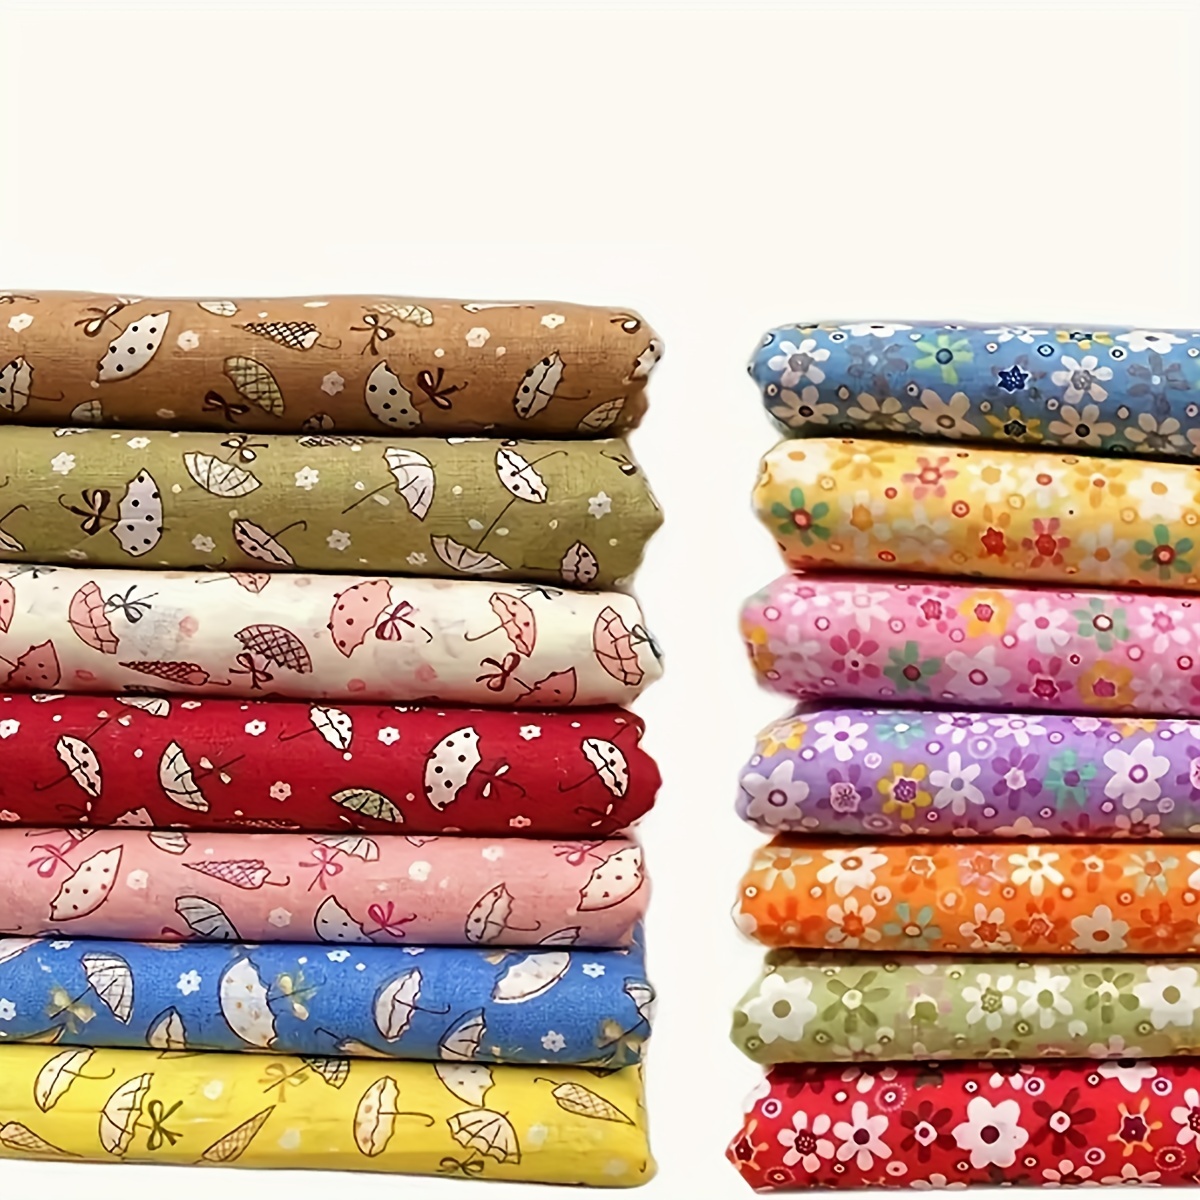 

7pcs 9.8*9.8in Floral Cotton Quilted Fabric Used For Handcraft Splicing Of Clothes Sewing Of Clothing Crafts